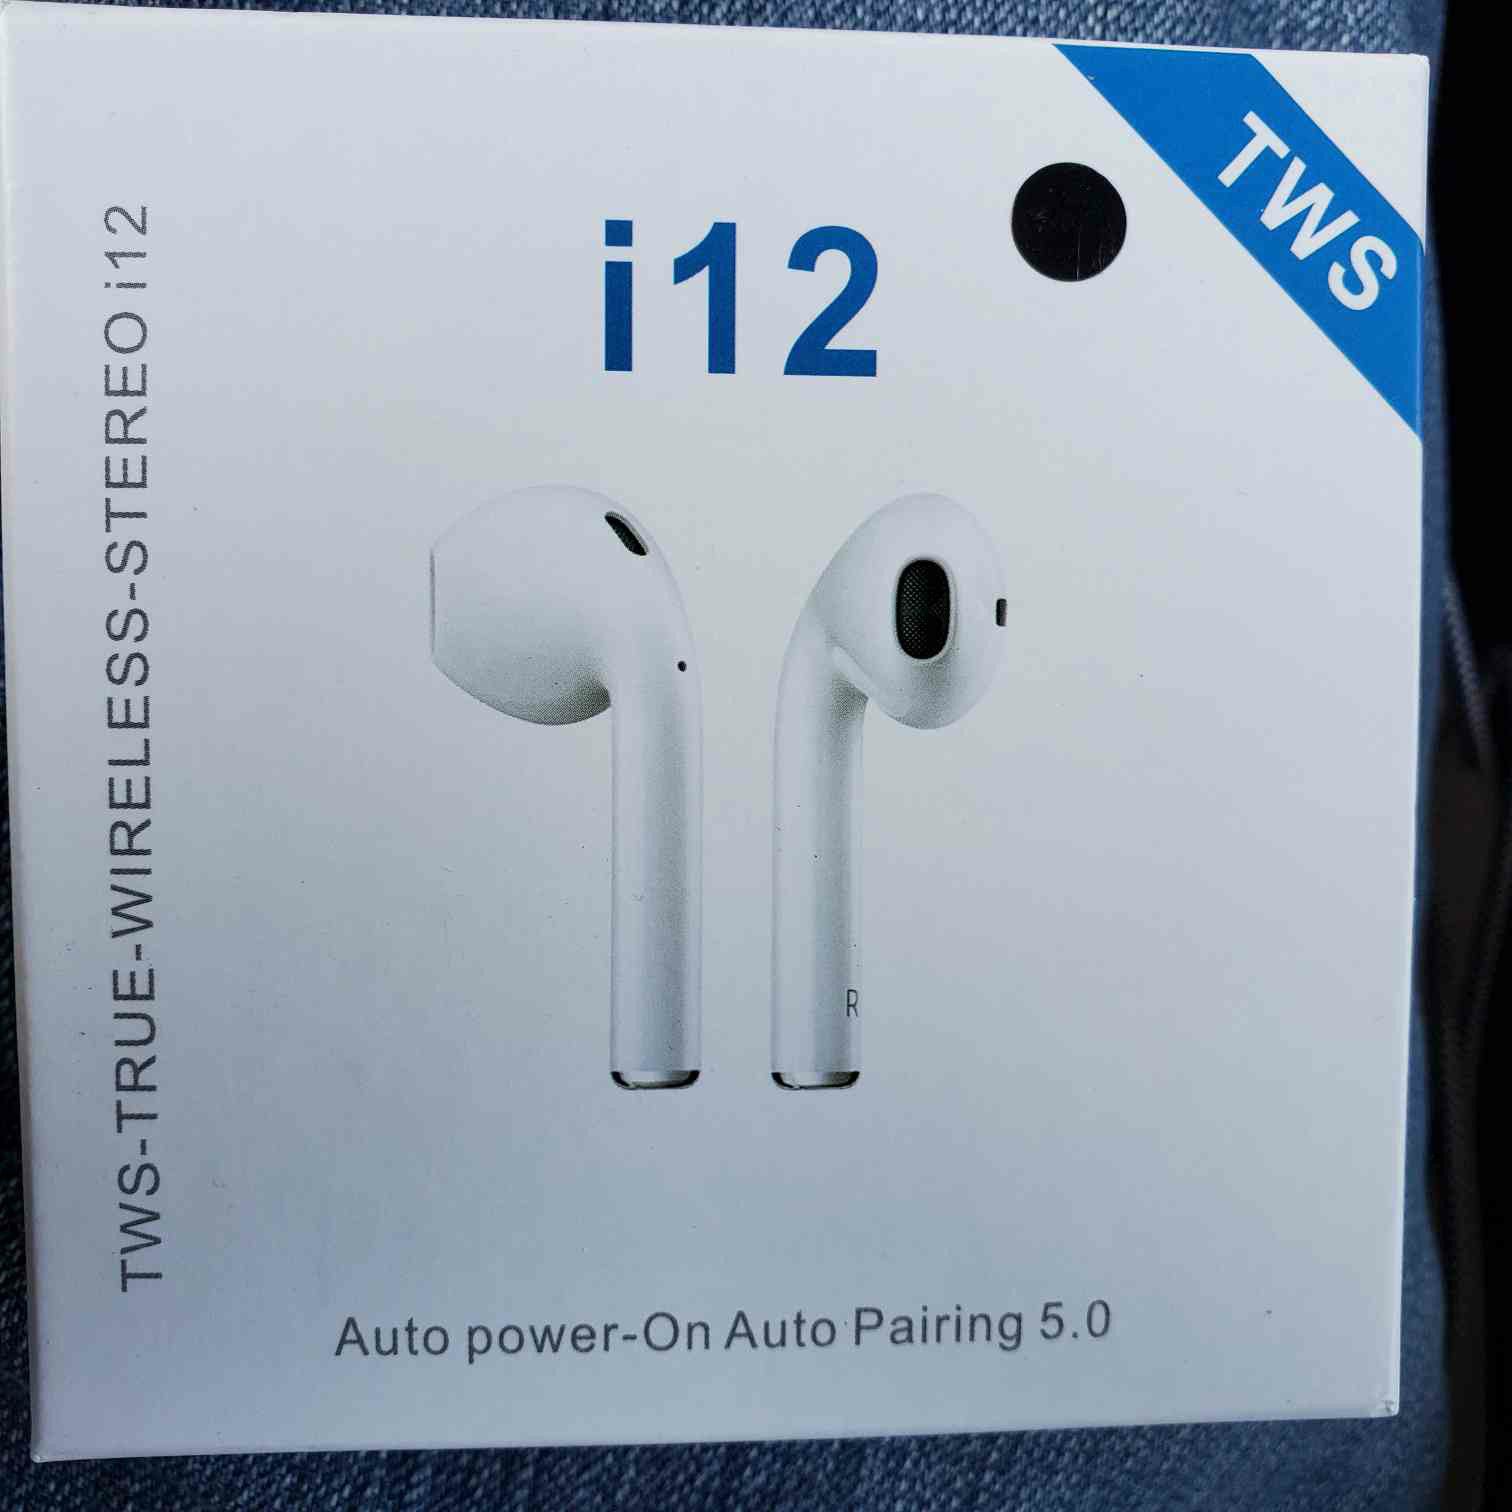 12 TWS Bluetooth Earphones Touch Control Built-in Mic Auto-pairing Hands-free Headset Headphone Earbud with HIFI Sound